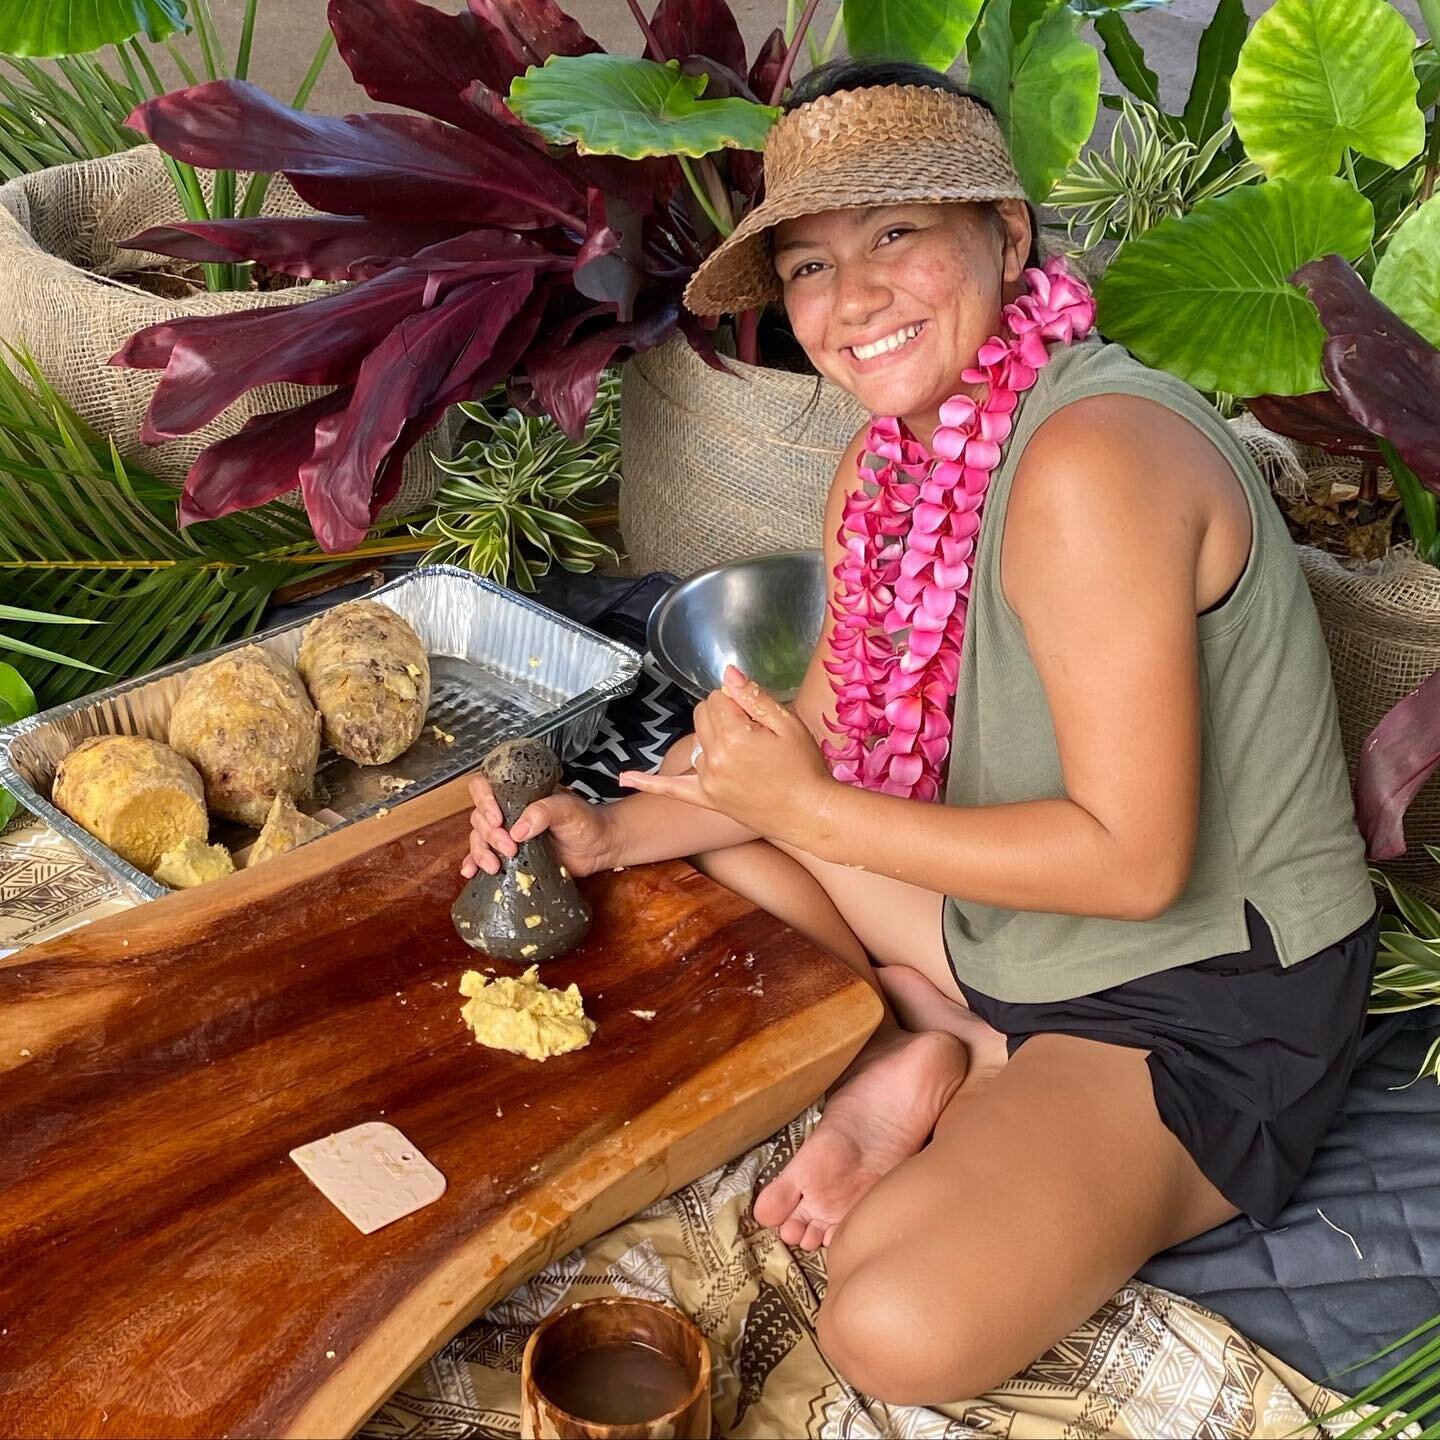 Went a great luau @mymauicountryclub last night! Important to take a little time off and appreciate the loving culture and amazing food of Hawaii and Polynesia! Kiani did a great demo of making poi using our taro (mana ulu). The smile says it all! #l